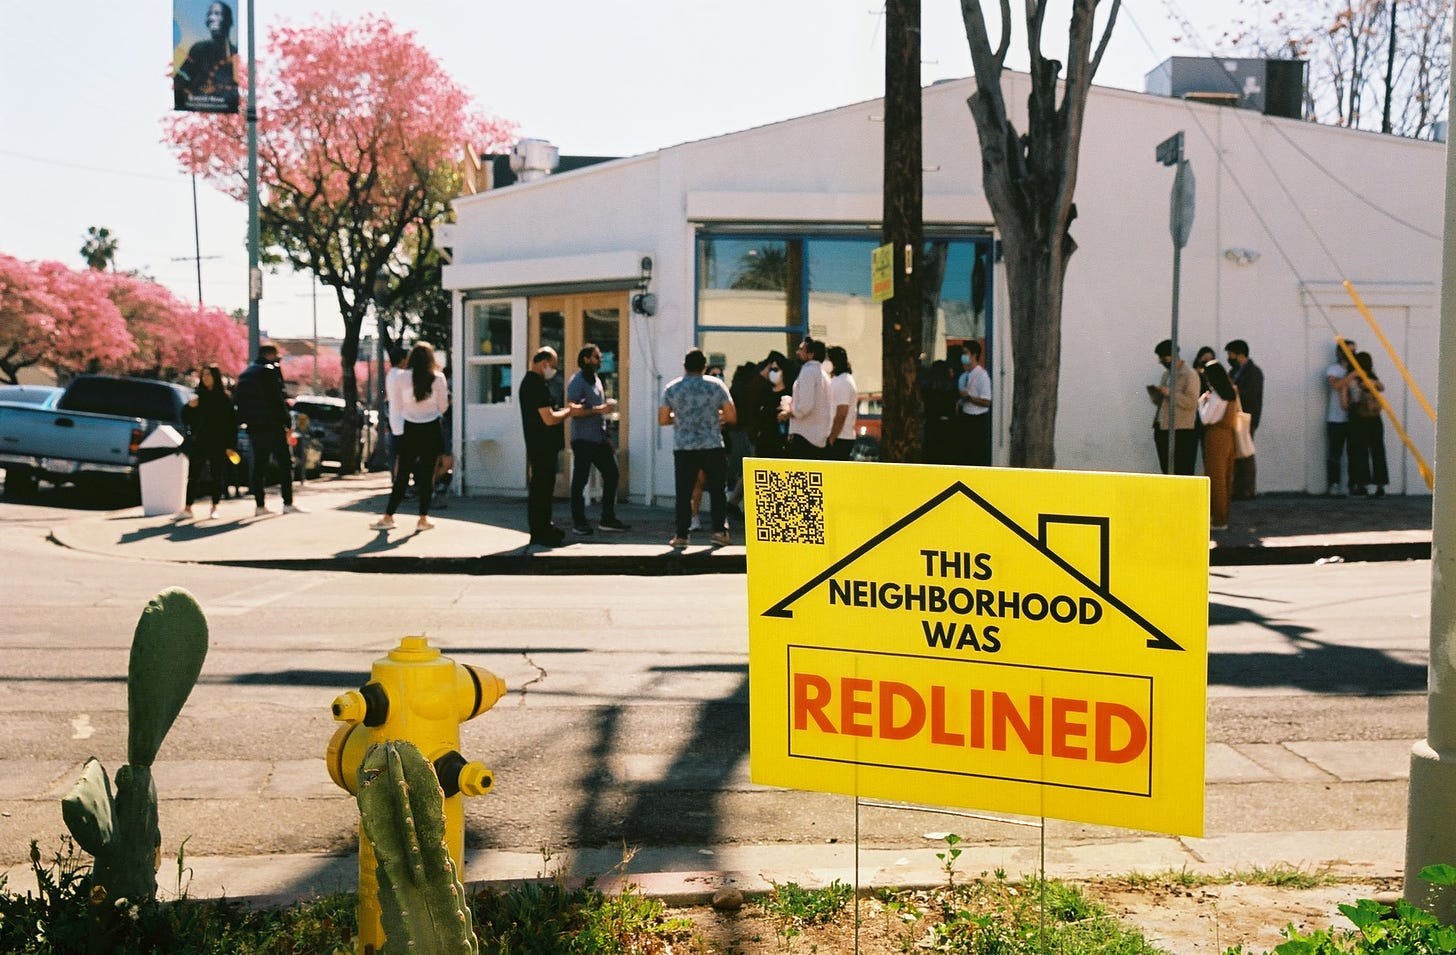 Photo of a yellow yard sign that says “This Neighborhood Was Redlined” planted in the dirt next to a cactus and a fire hydrant. Behind the sign is a long line of people waiting to order at Courage Bagel.